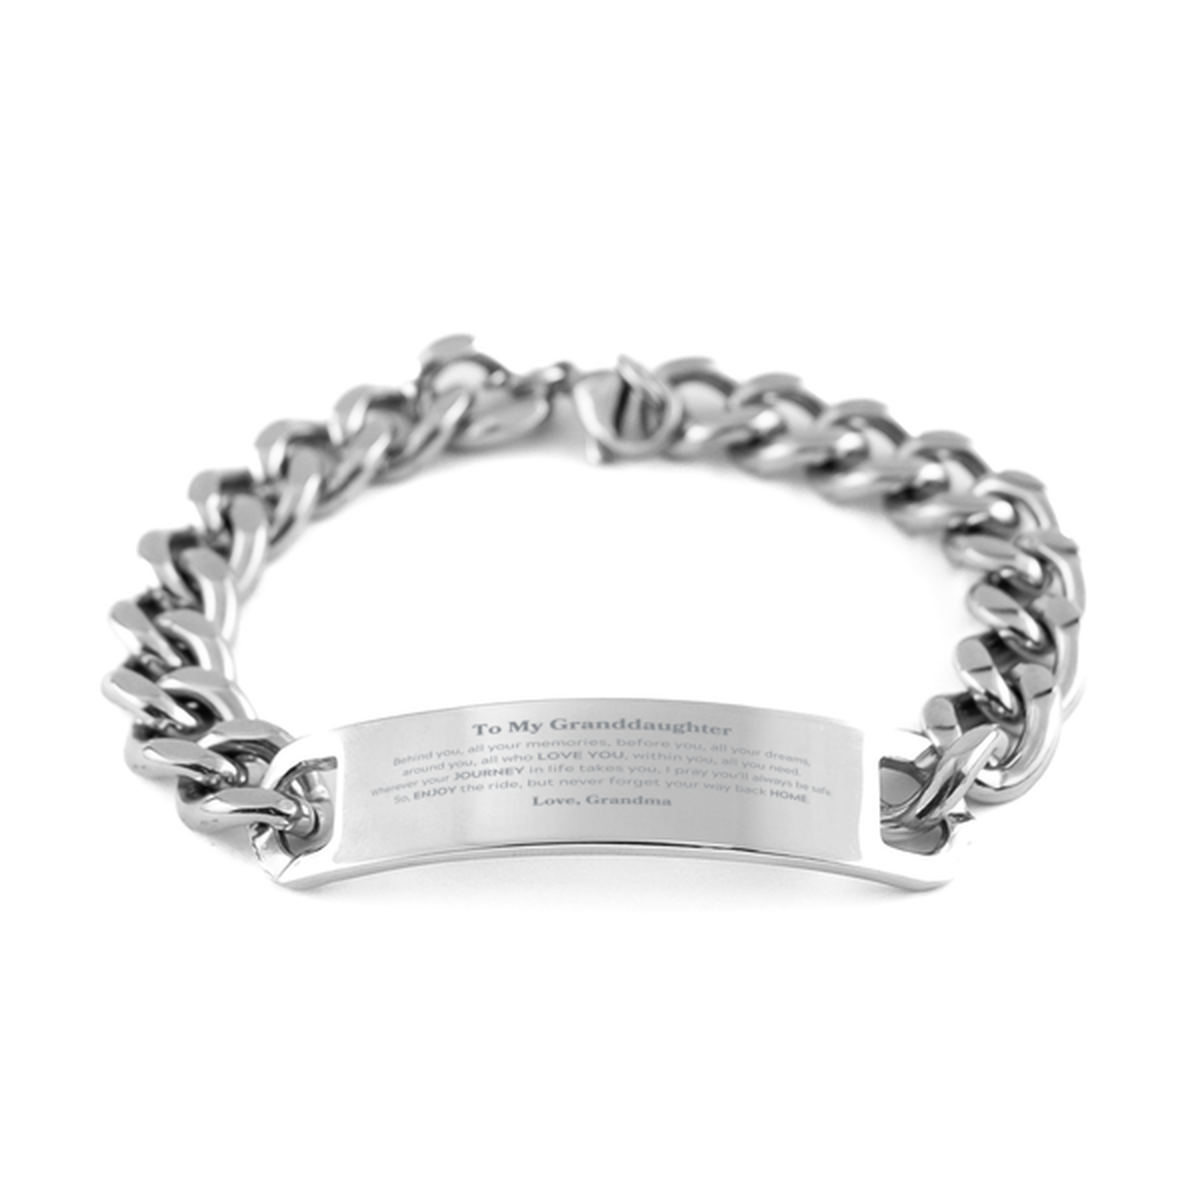 To My Granddaughter Graduation Gifts from Grandma, Granddaughter Cuban Chain Stainless Steel Bracelet Christmas Birthday Gifts for Granddaughter Behind you, all your memories, before you, all your dreams. Love, Grandma